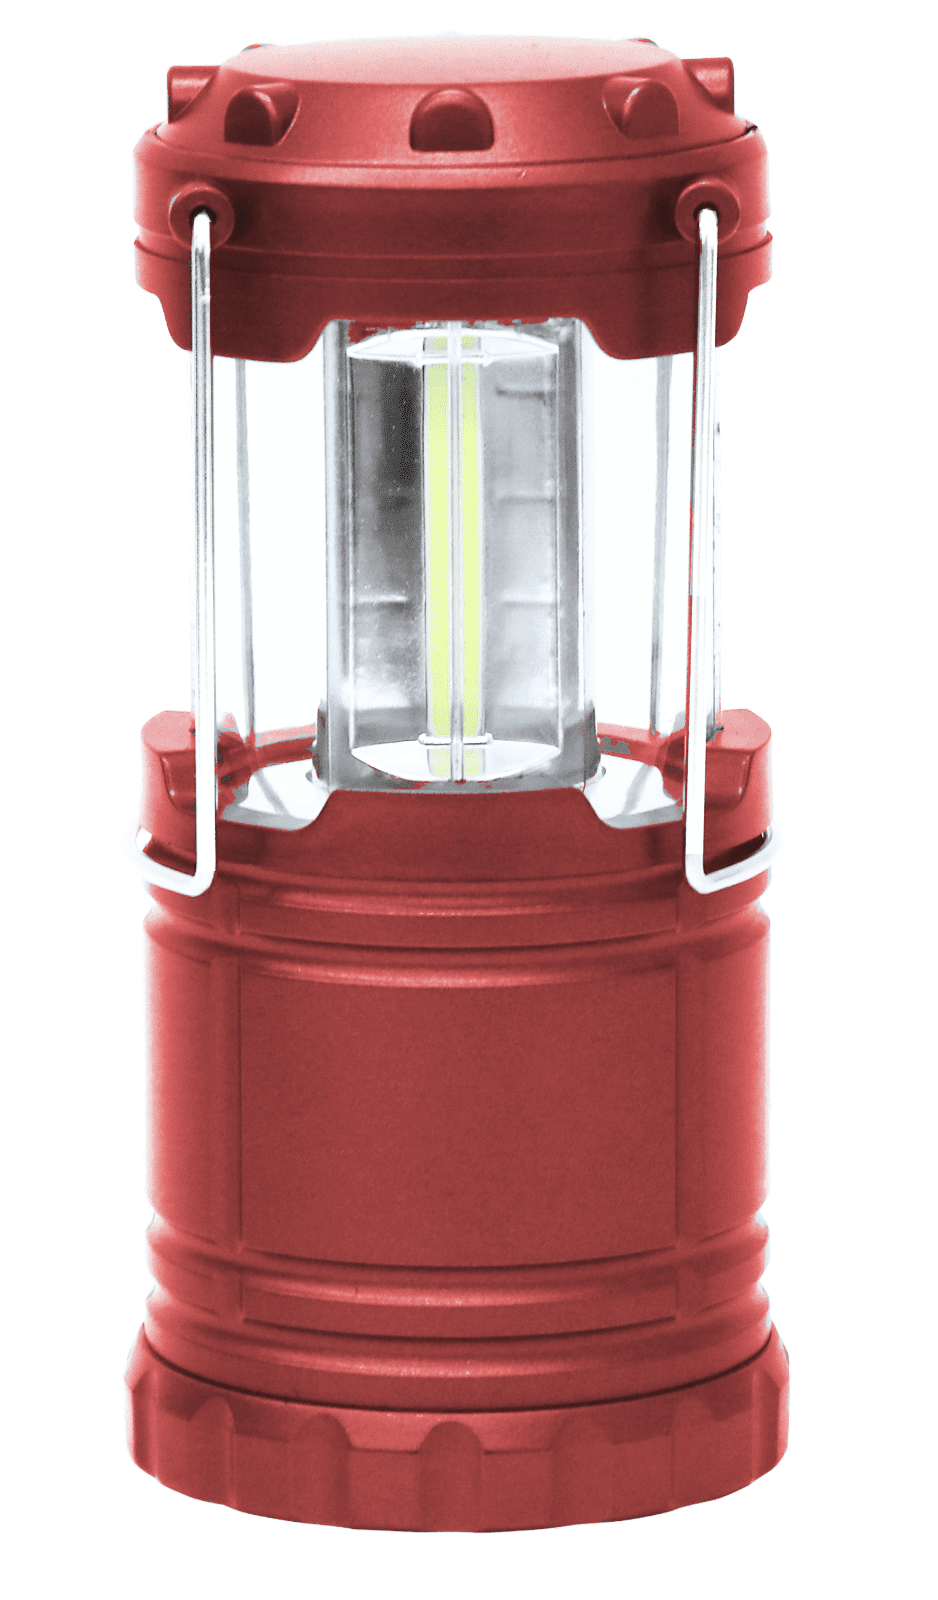 This Military Grade Camping Lantern is Perfect For Trips Outdoors - Men's  Journal